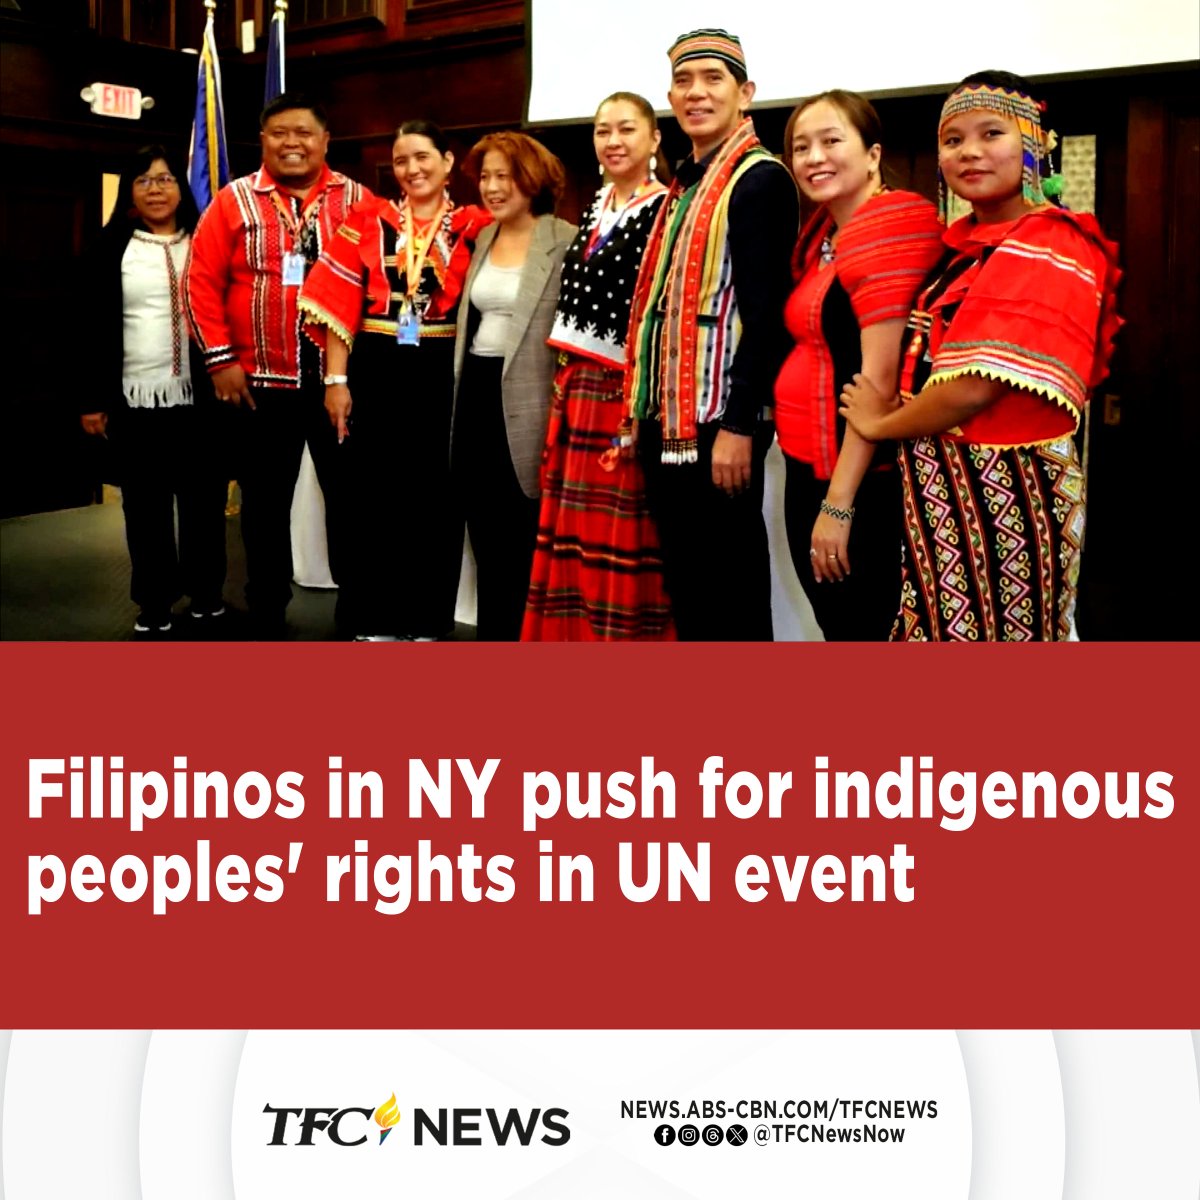 Filipinos join the activities in New York for the advancement of indigenous peoples' rights at the 10th anniversary of a United Nations conference on indigenous issues.

@dontagala reports. #TFCNews

WATCH: youtu.be/GvW_5S9NnqI